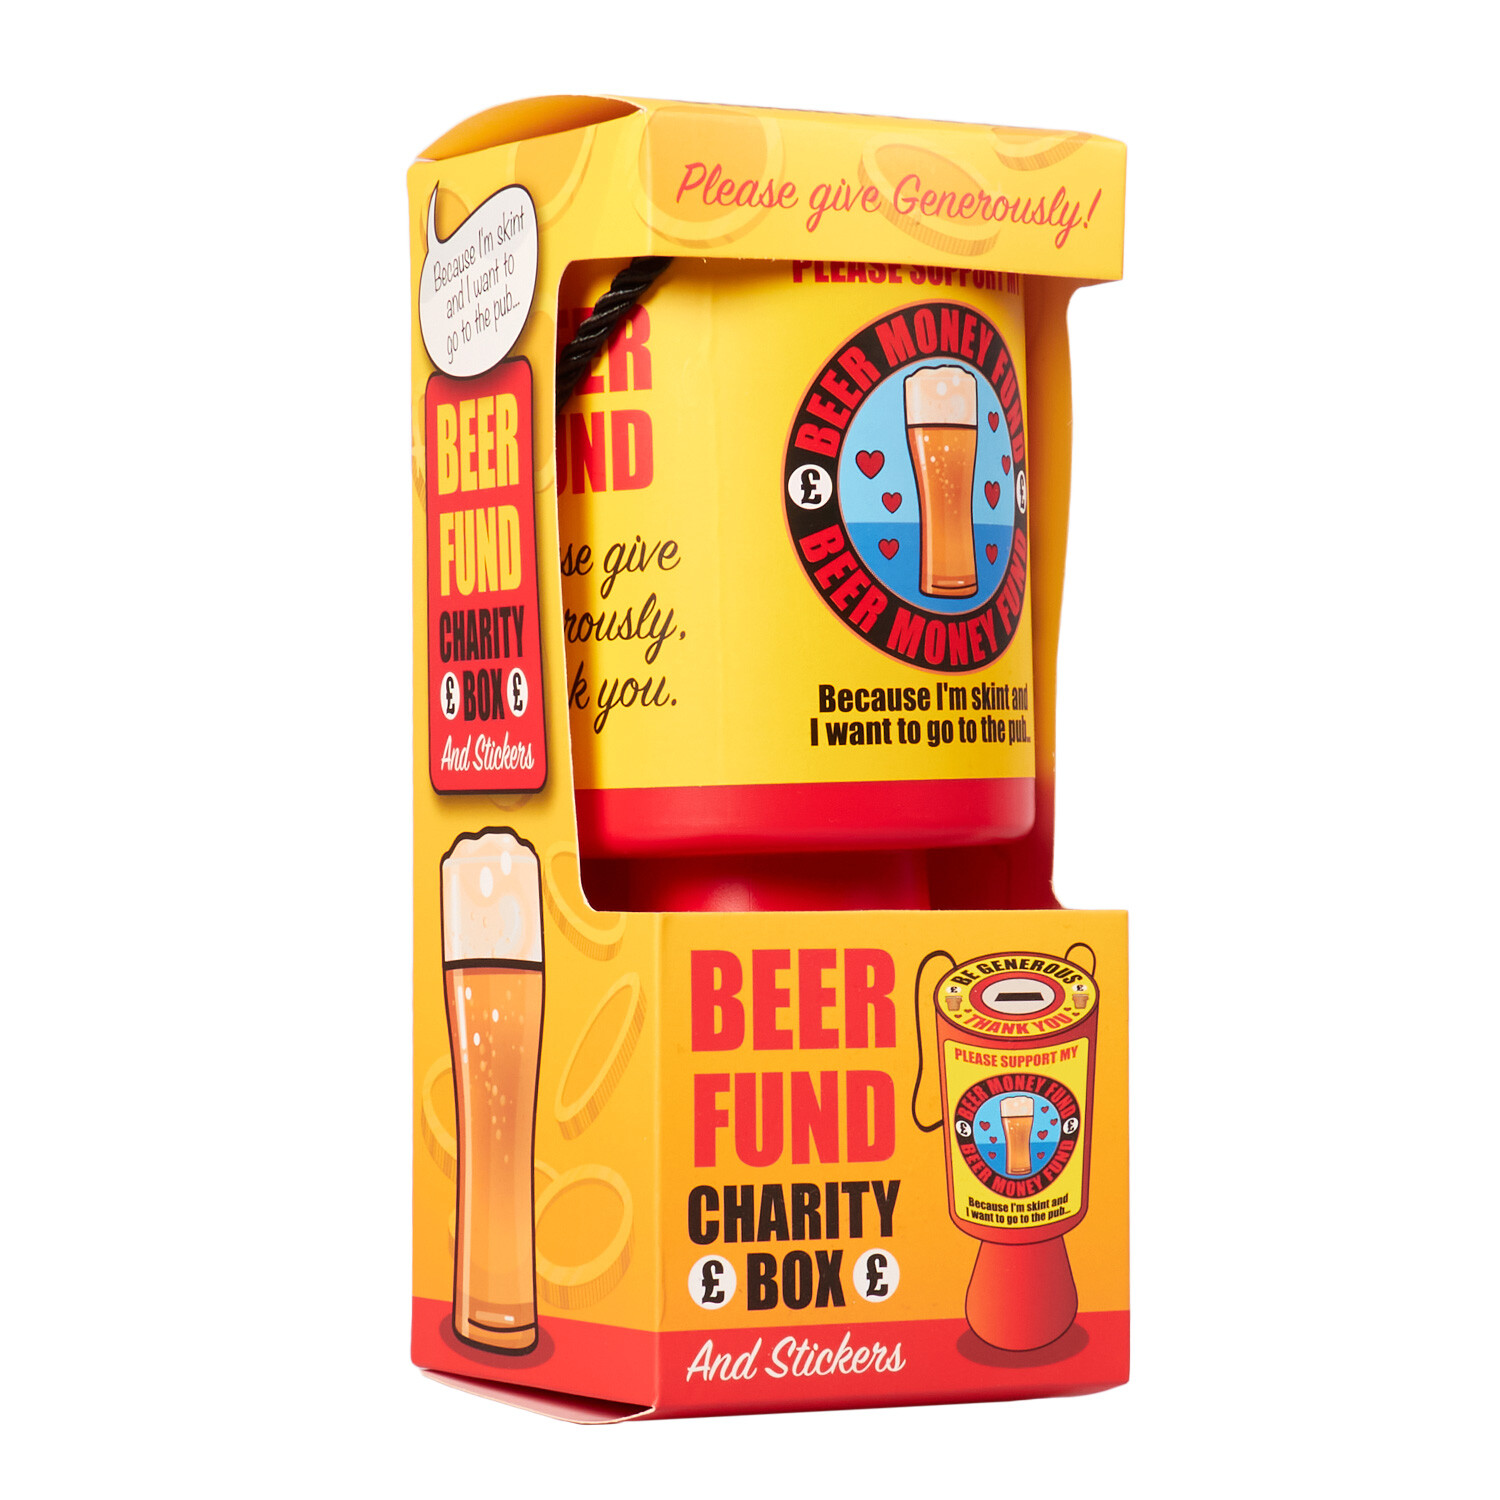 G&G Beer Fund Charity Box Image 1